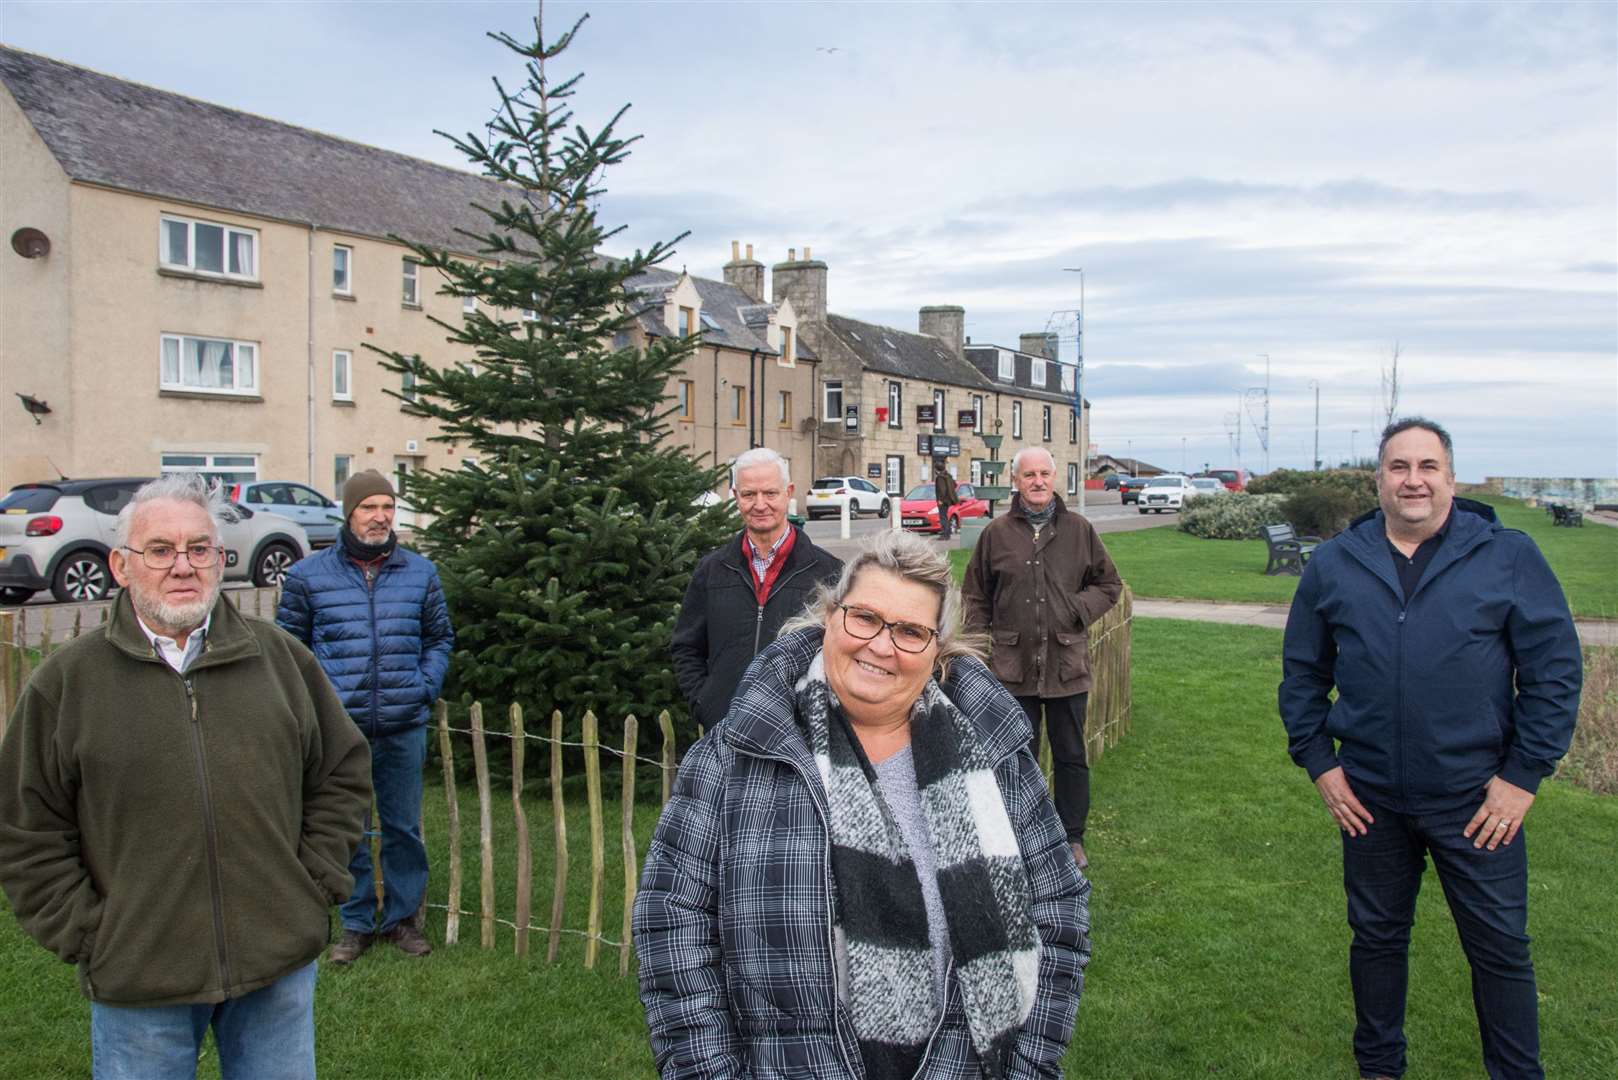 Christmas cheer will light up Lossiemouth